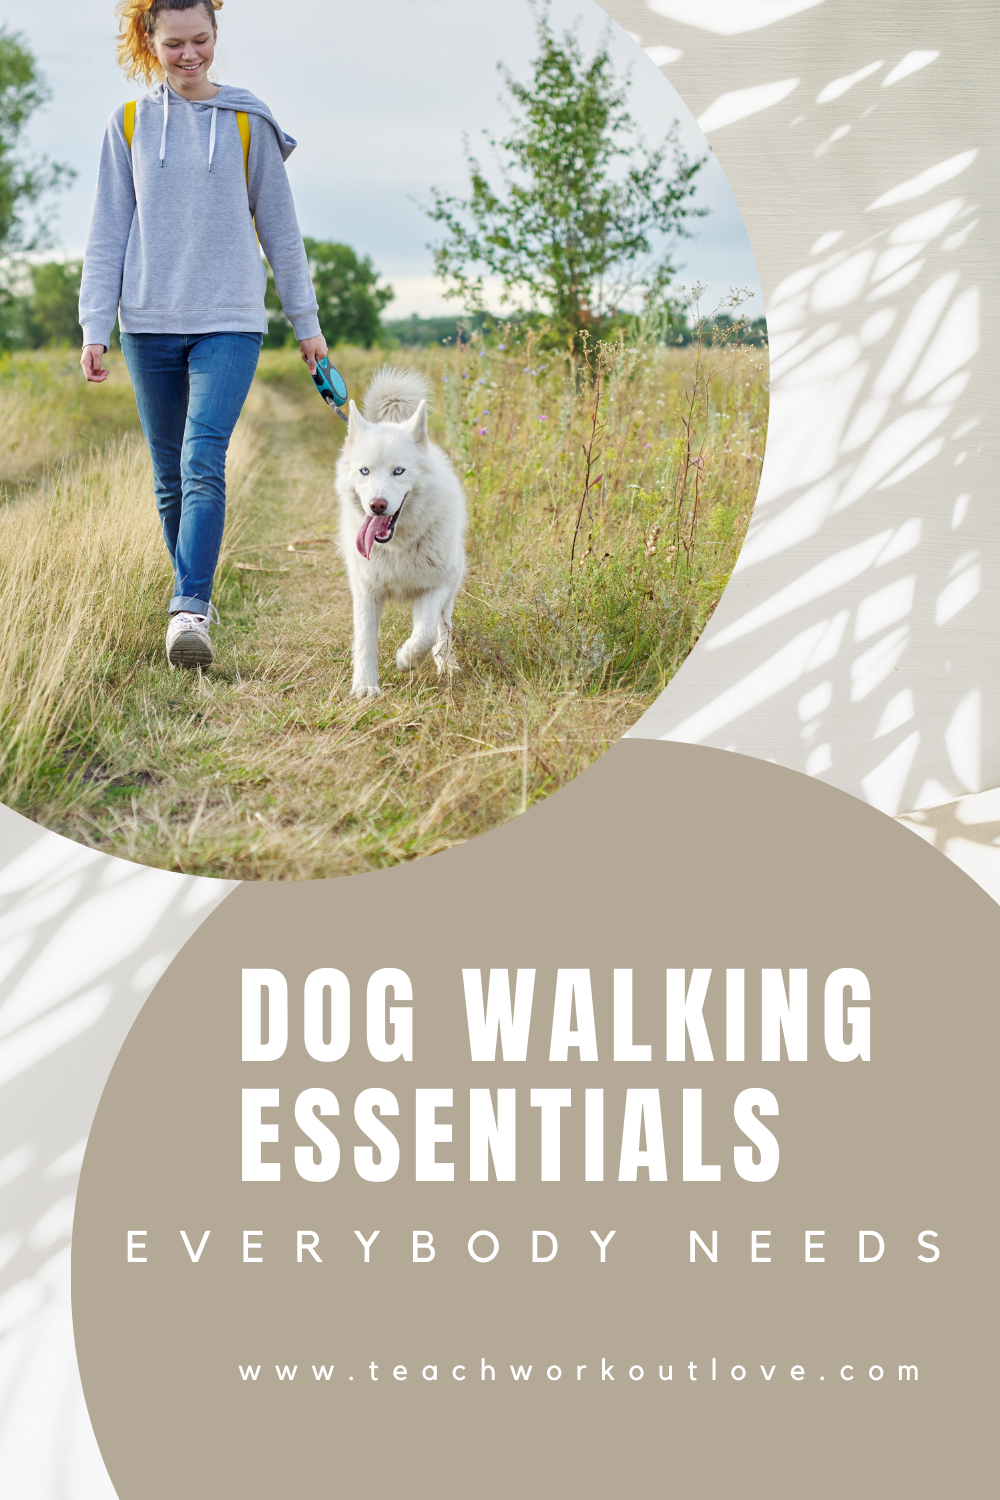 To make the most of your dog walks, you’ll need to invest in a number of essentials to keep both you and your dog safe, warm, and comfortable. Below, we’ve listed some of the essentials that everybody needs to purchase for dog walking.